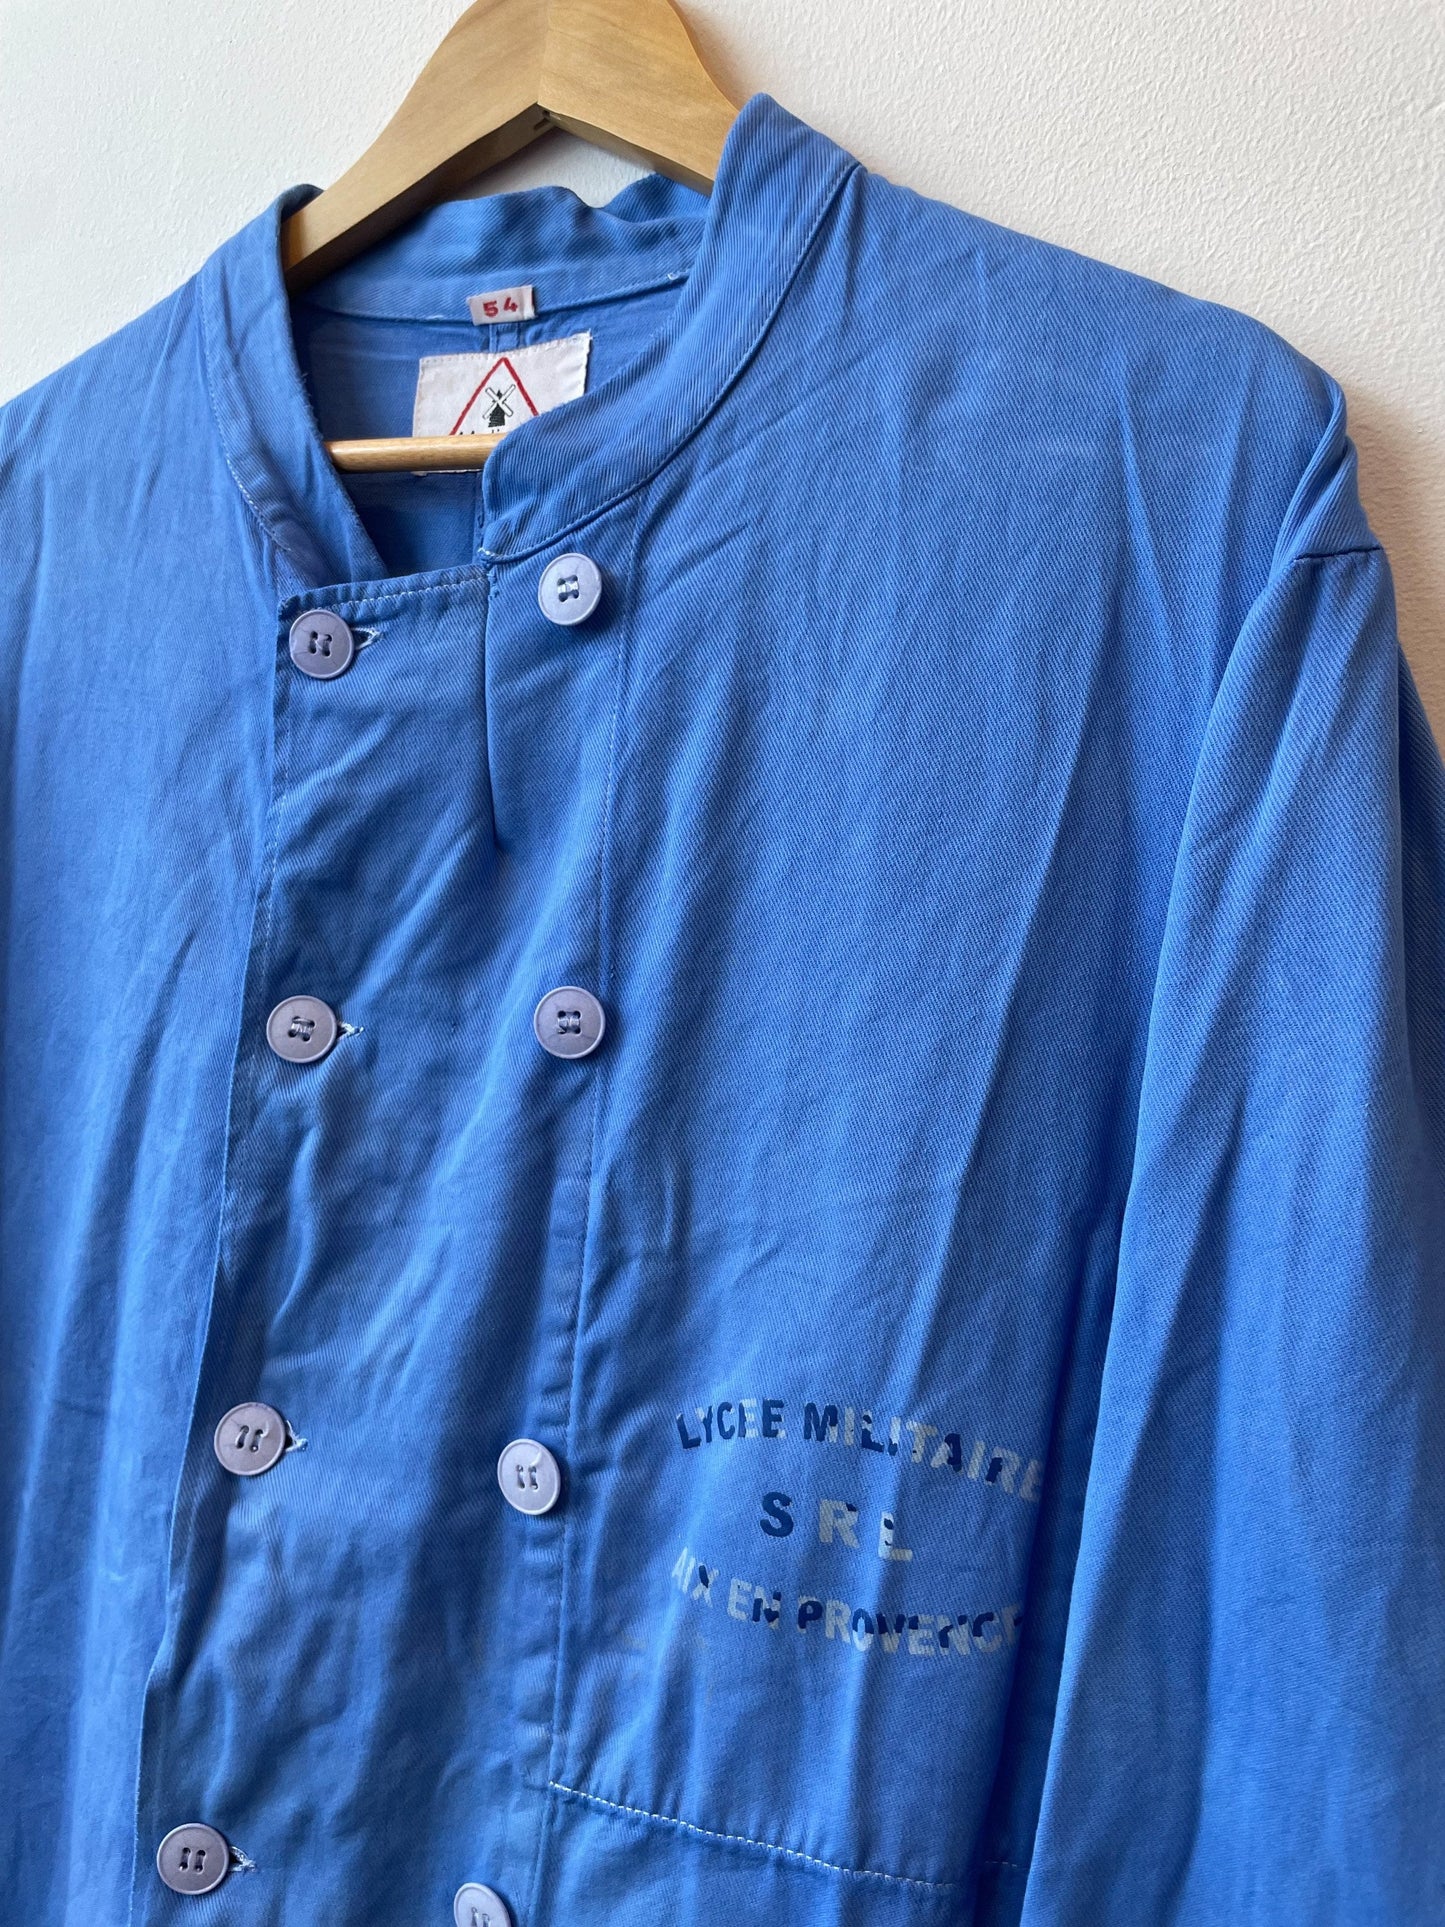 Vintage Double Breasted Molinel Workwear Shirt